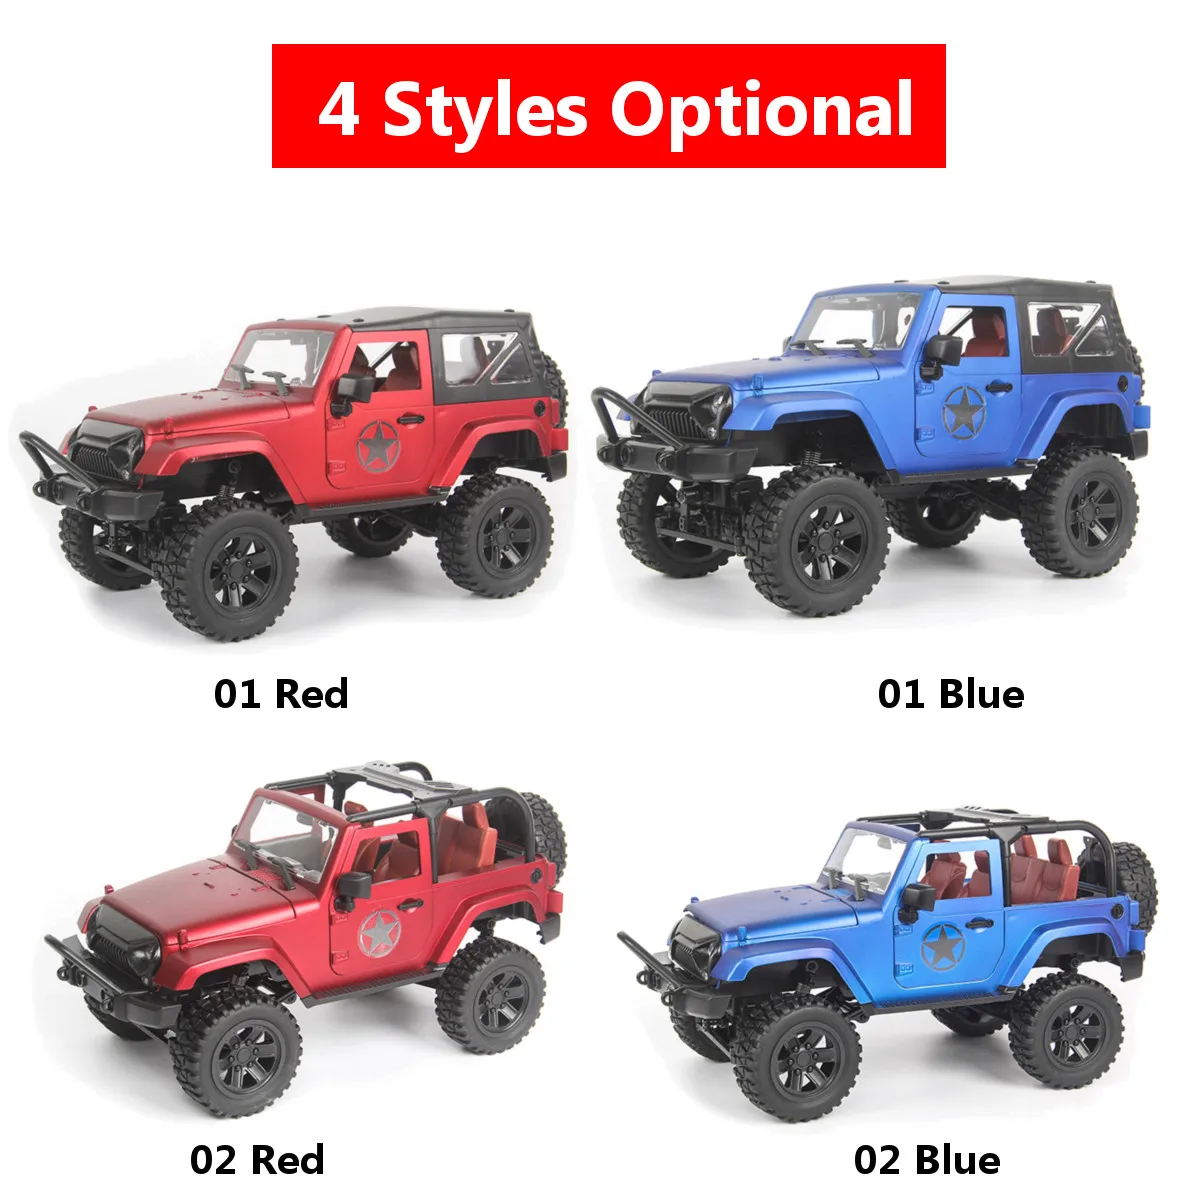 RBR/C RB F1 F2 1/14 2.4G 4WD RC Car Off-Road Crawler All Proportional RTR Remote Control Vehicle Electric Models Toys for Kids enlarge